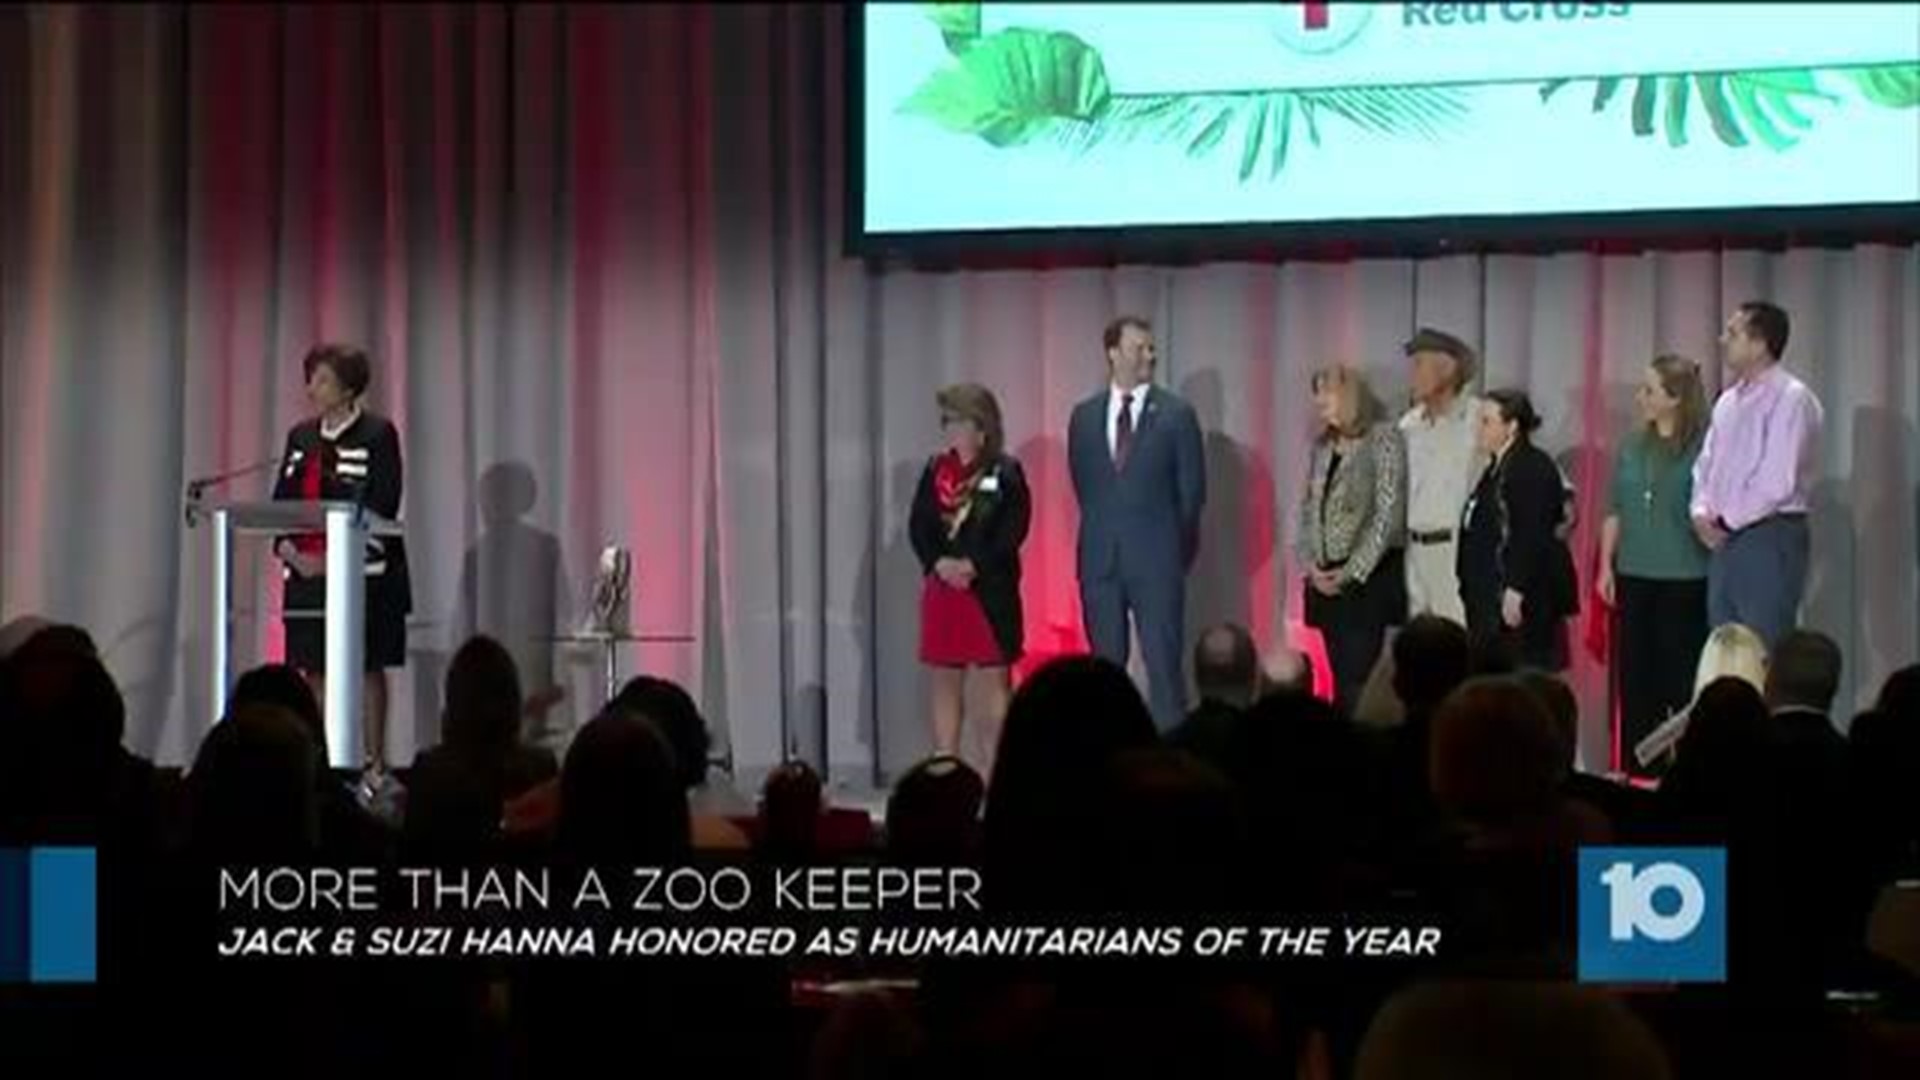 Jack and Suzi Hanna honored as Humanitarians of the Year